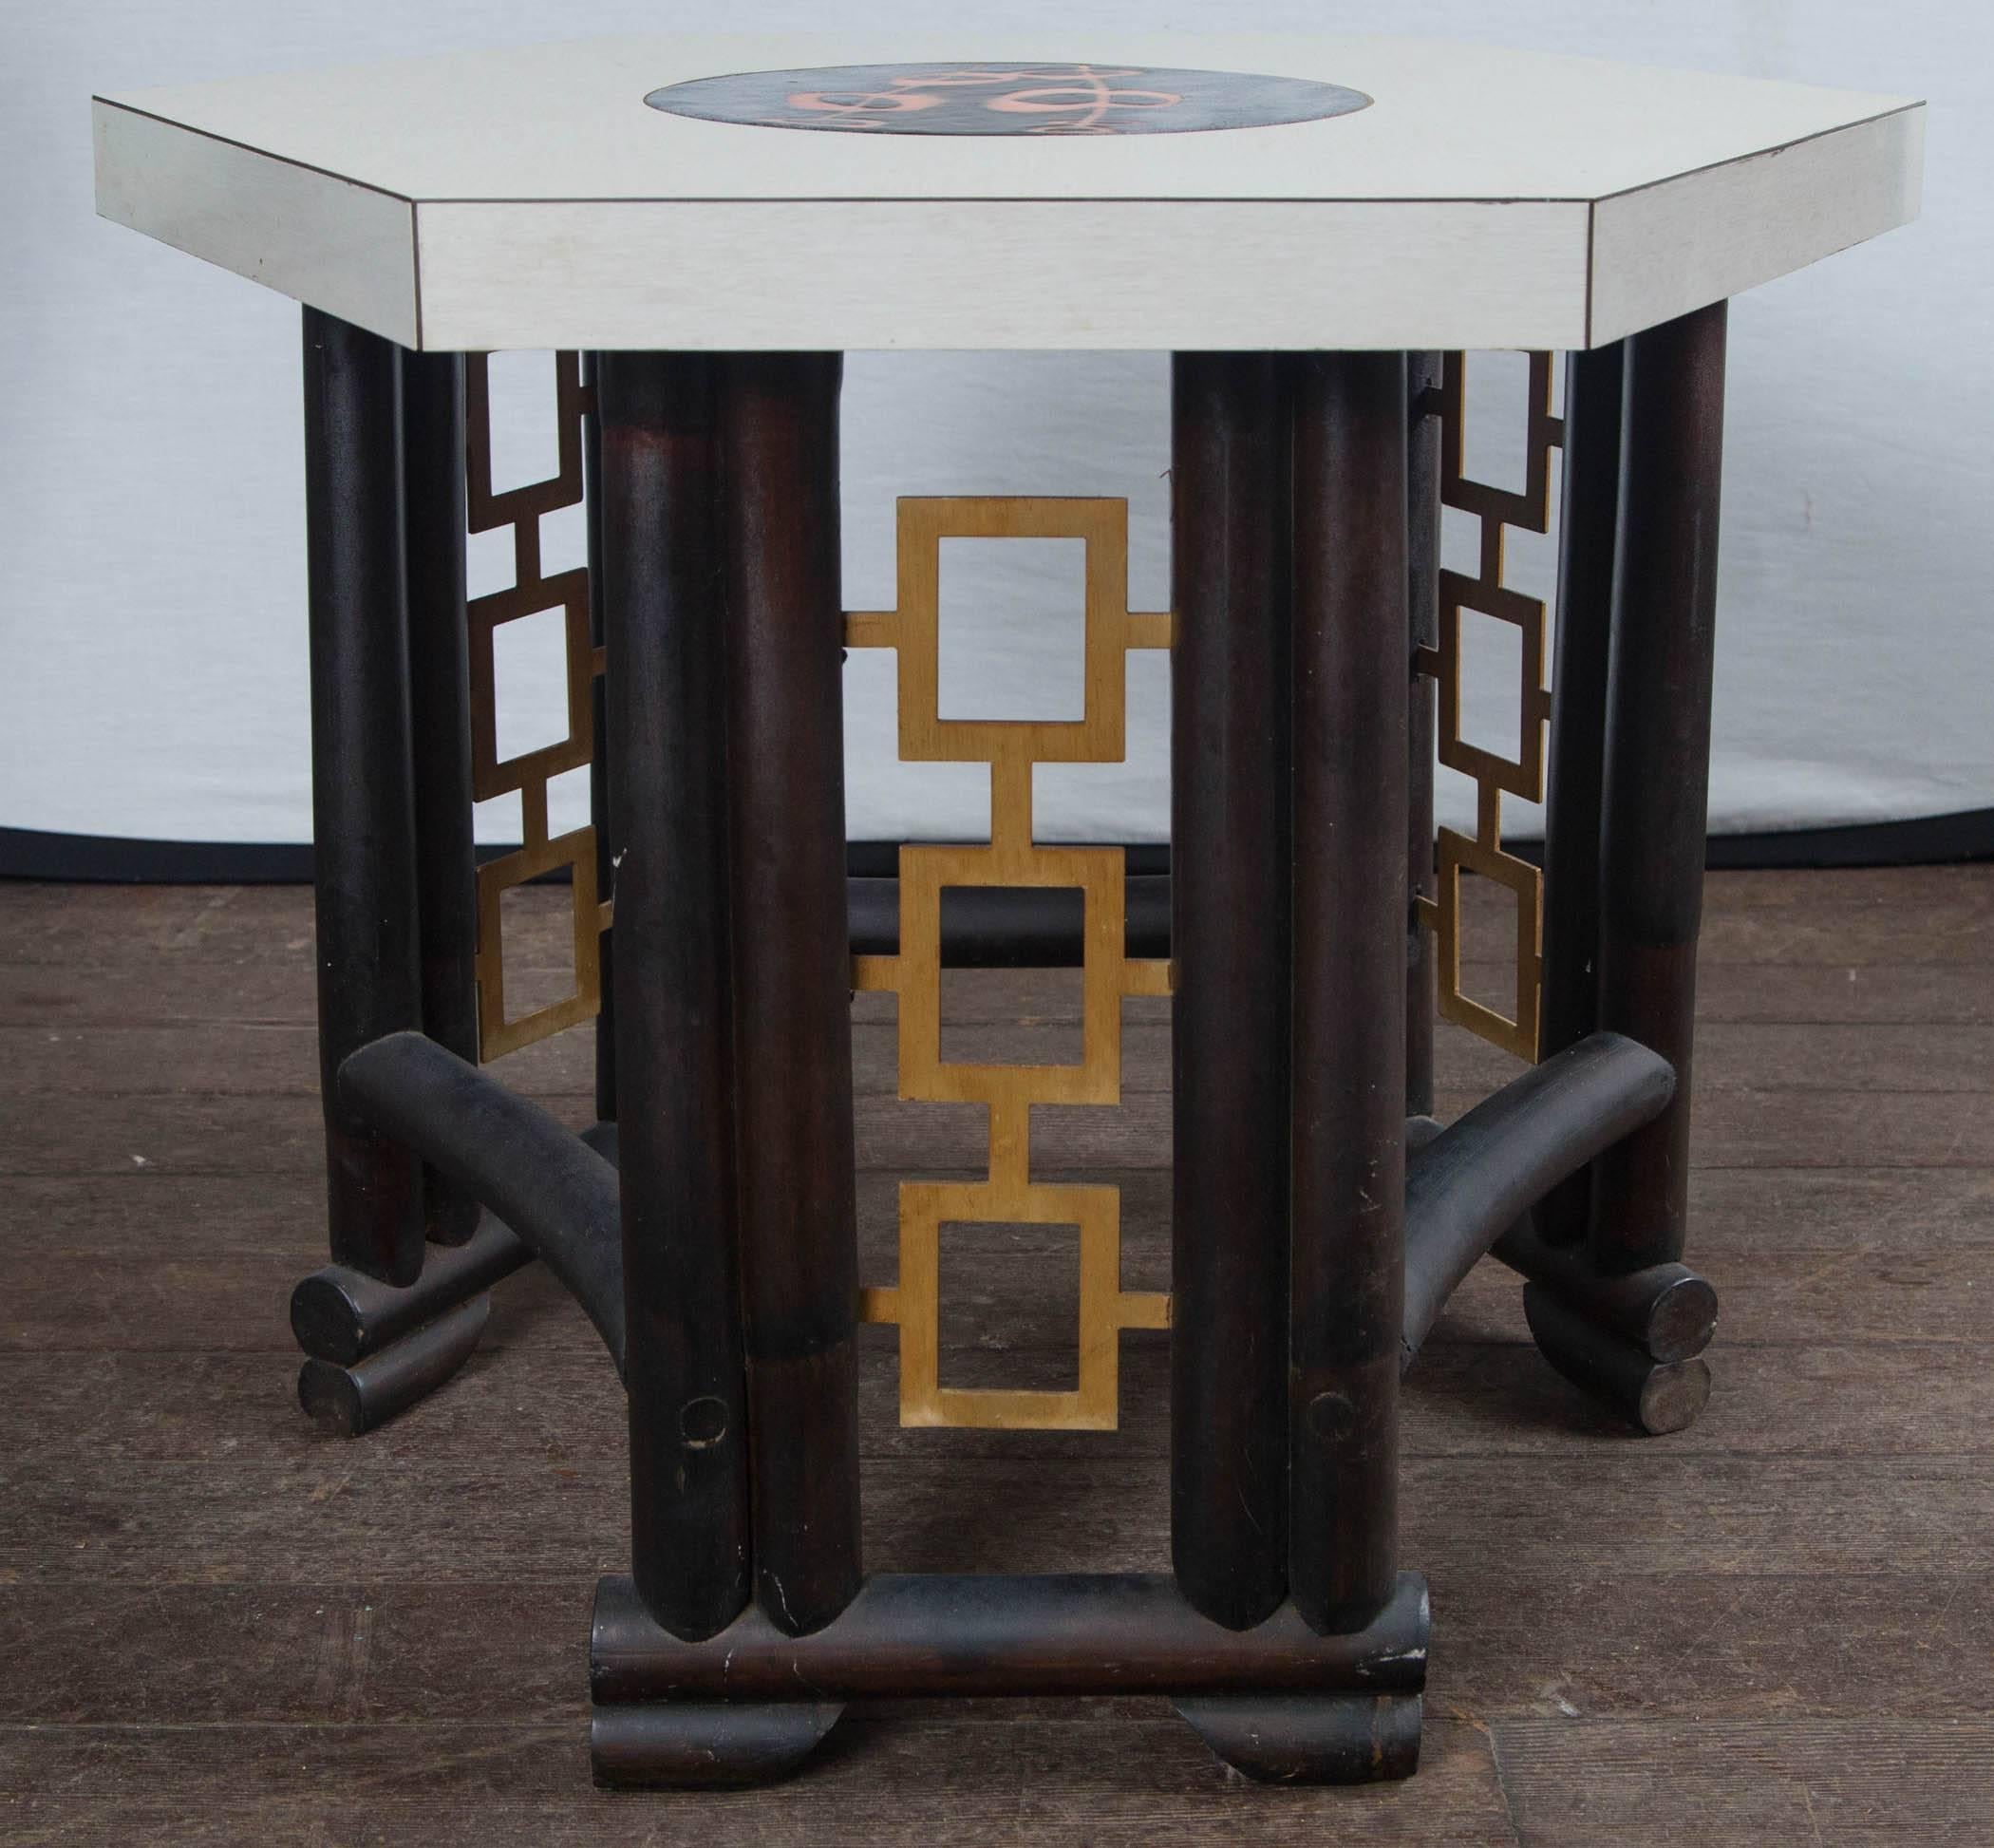 Custom-made Asian, bamboo style wood table, laminate top with inlaid round enameled piece in center. Geometric gilt metal design on base. Very chic!